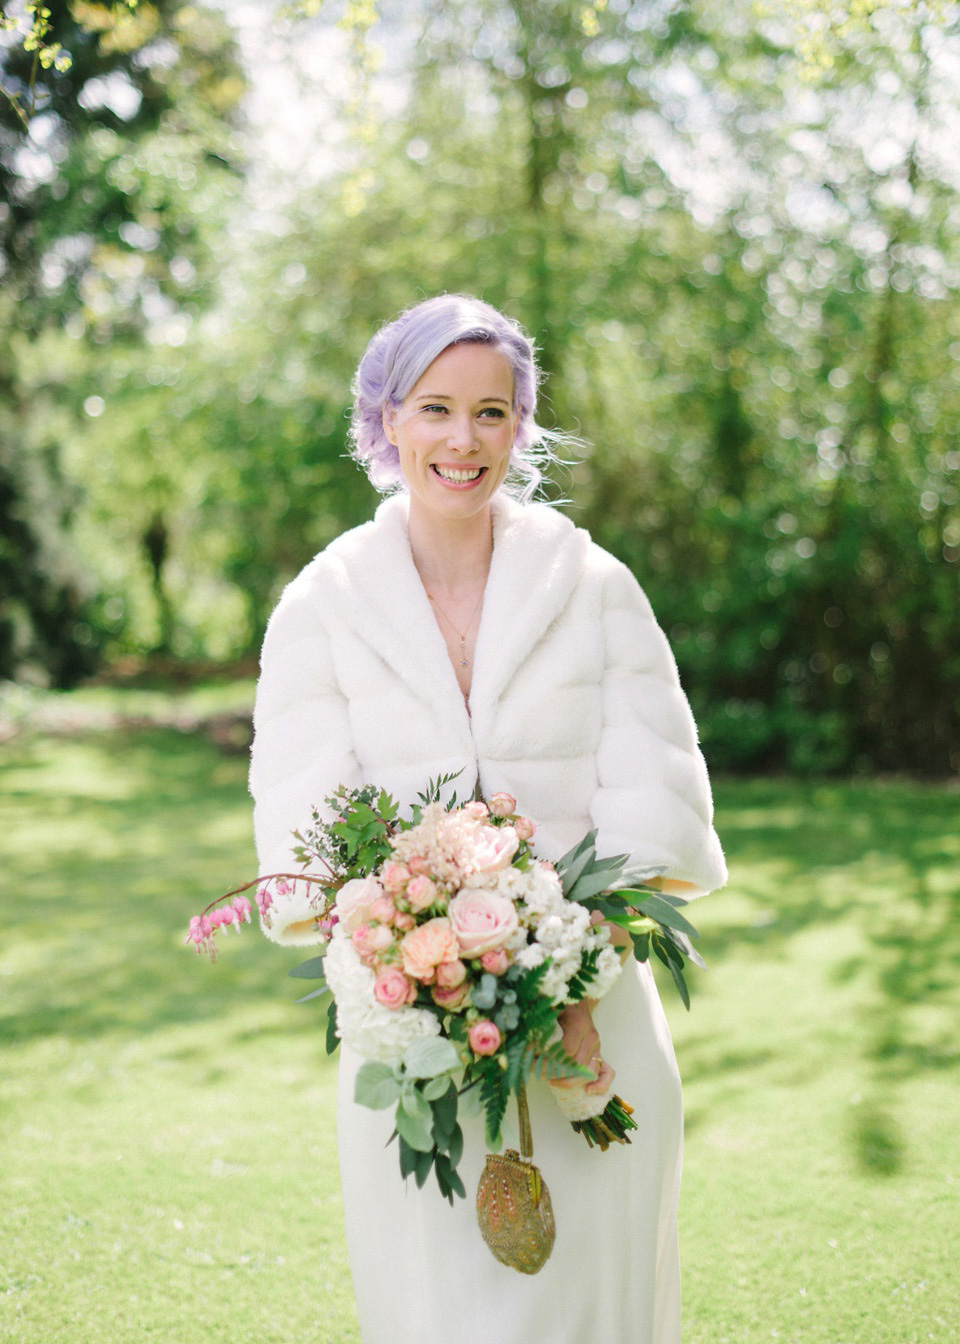 Lilac Hair and Pastel Flowers for an Intimate Springtime Pub Wedding Shot on Film. Photography by Hannah Duffy.